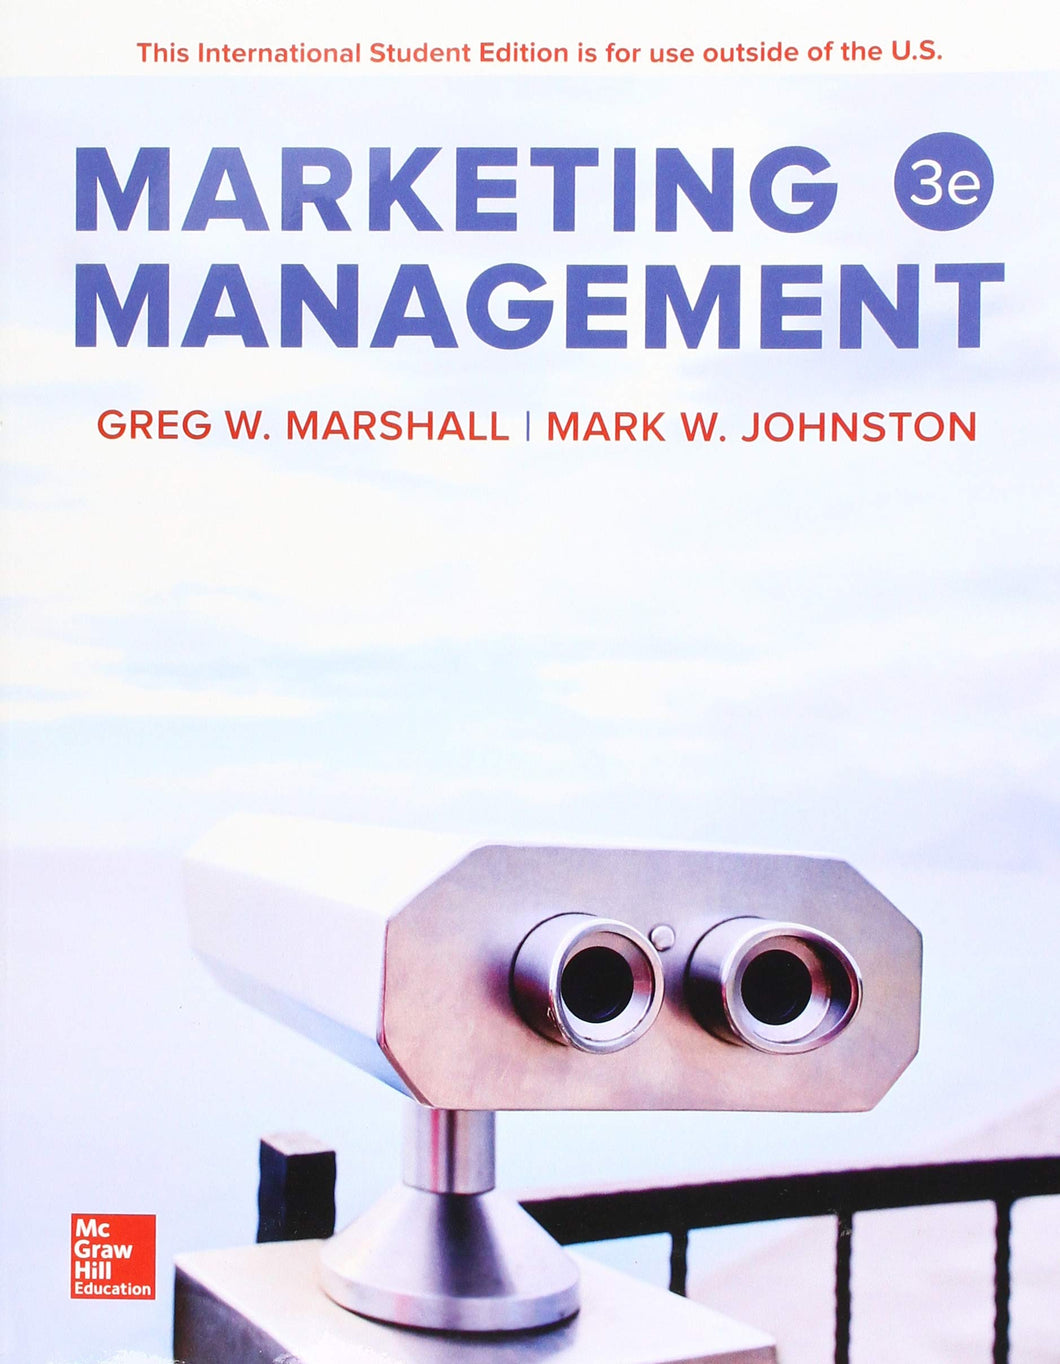 Marketing Management [Paperback] 3e by Marshall, Greg - Smiling Bookstore :-)